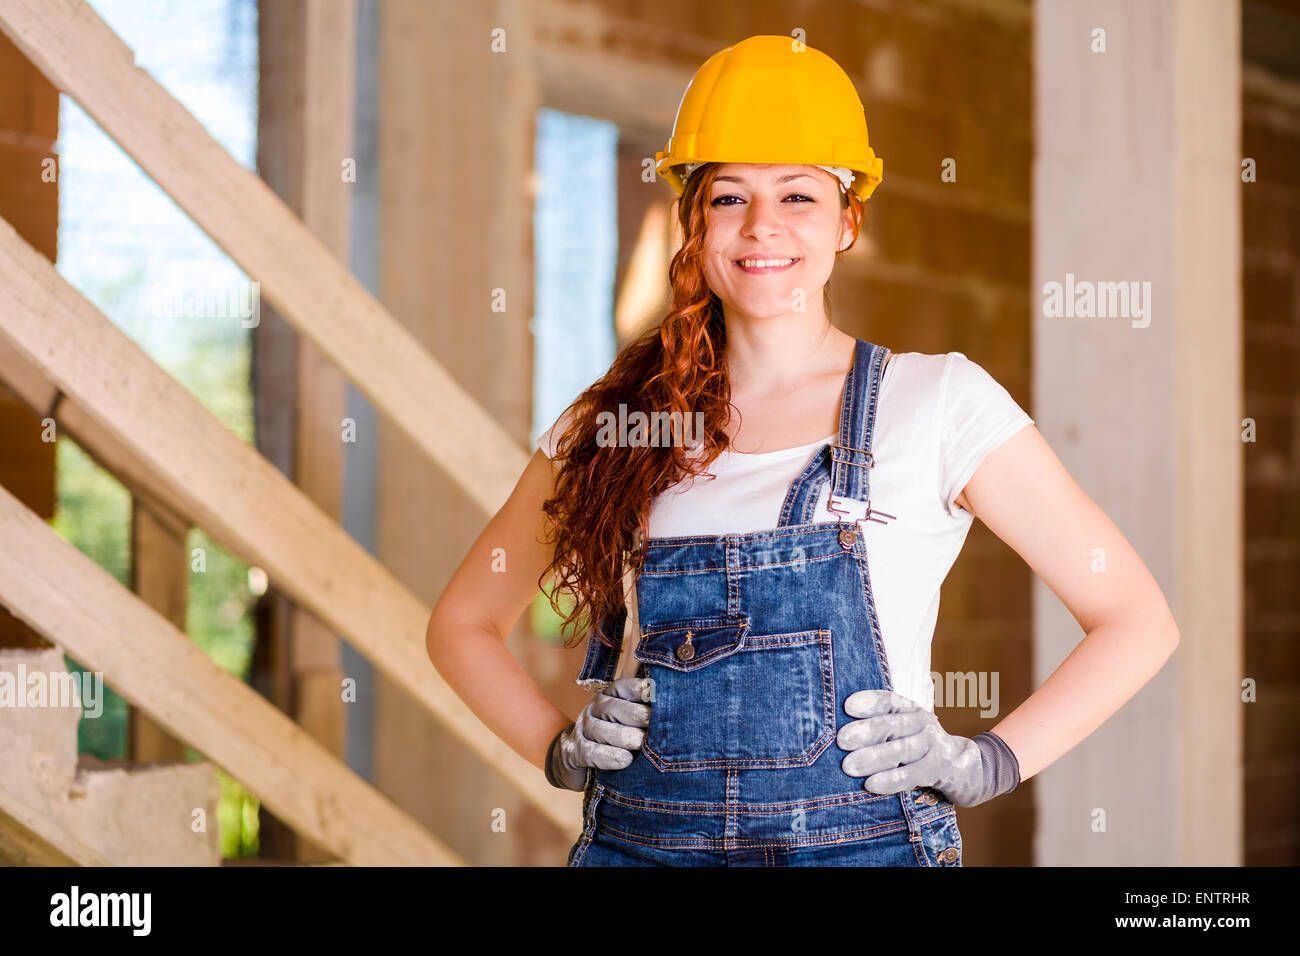 Smiling Woman Bricklayer with Overalls and Helmet with Her Hands on Hips Stock Photo